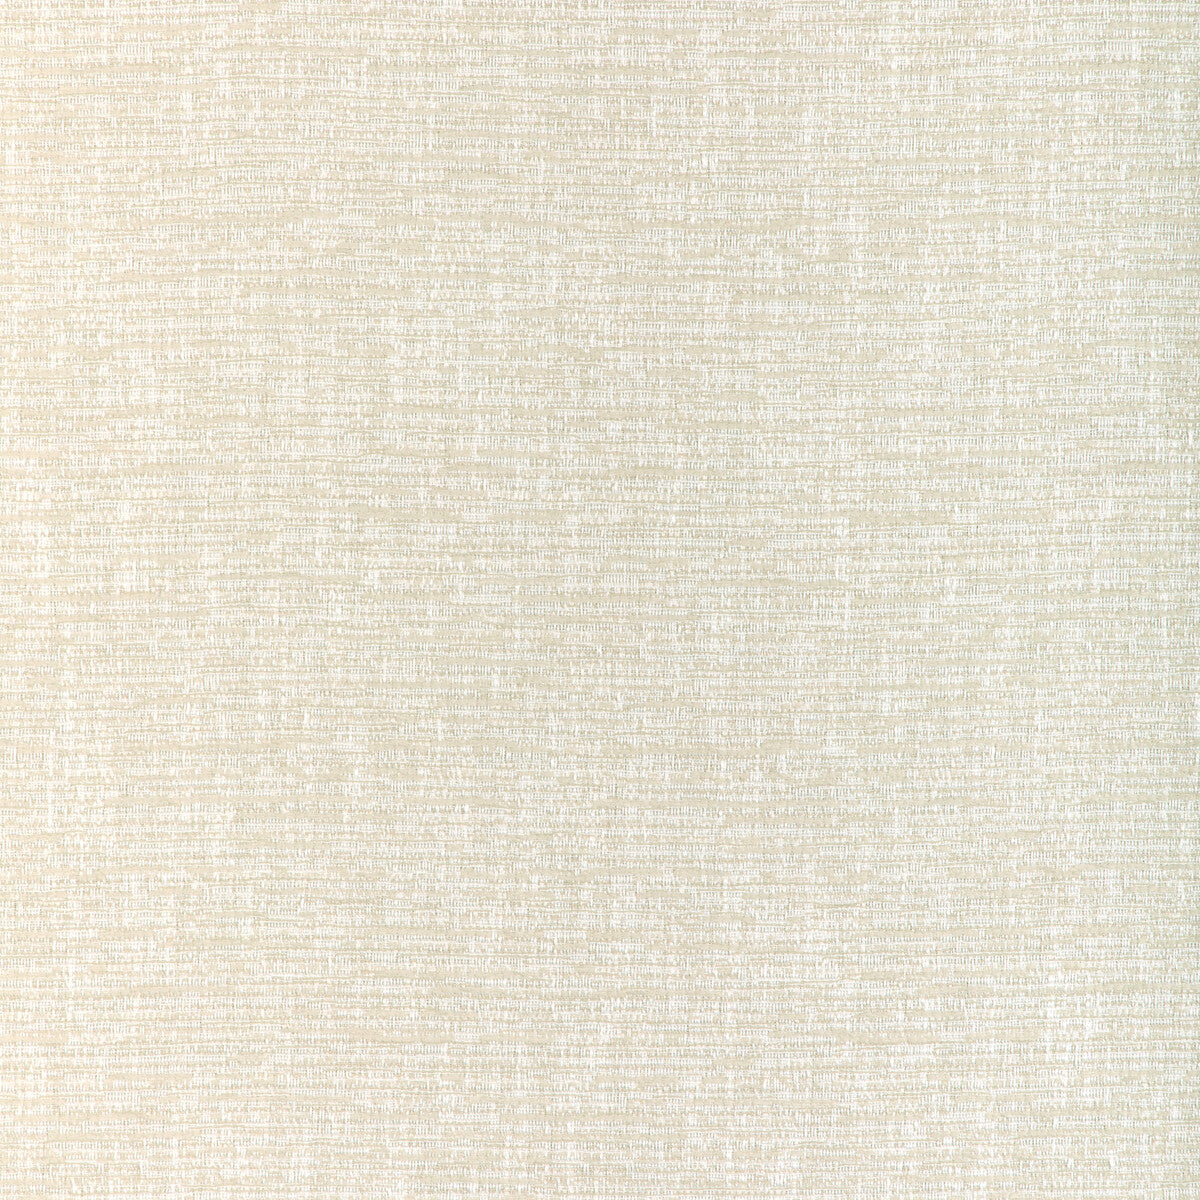 Bellows fabric in cream color - pattern 37048.1.0 - by Kravet Design in the Thom Filicia Latitude collection